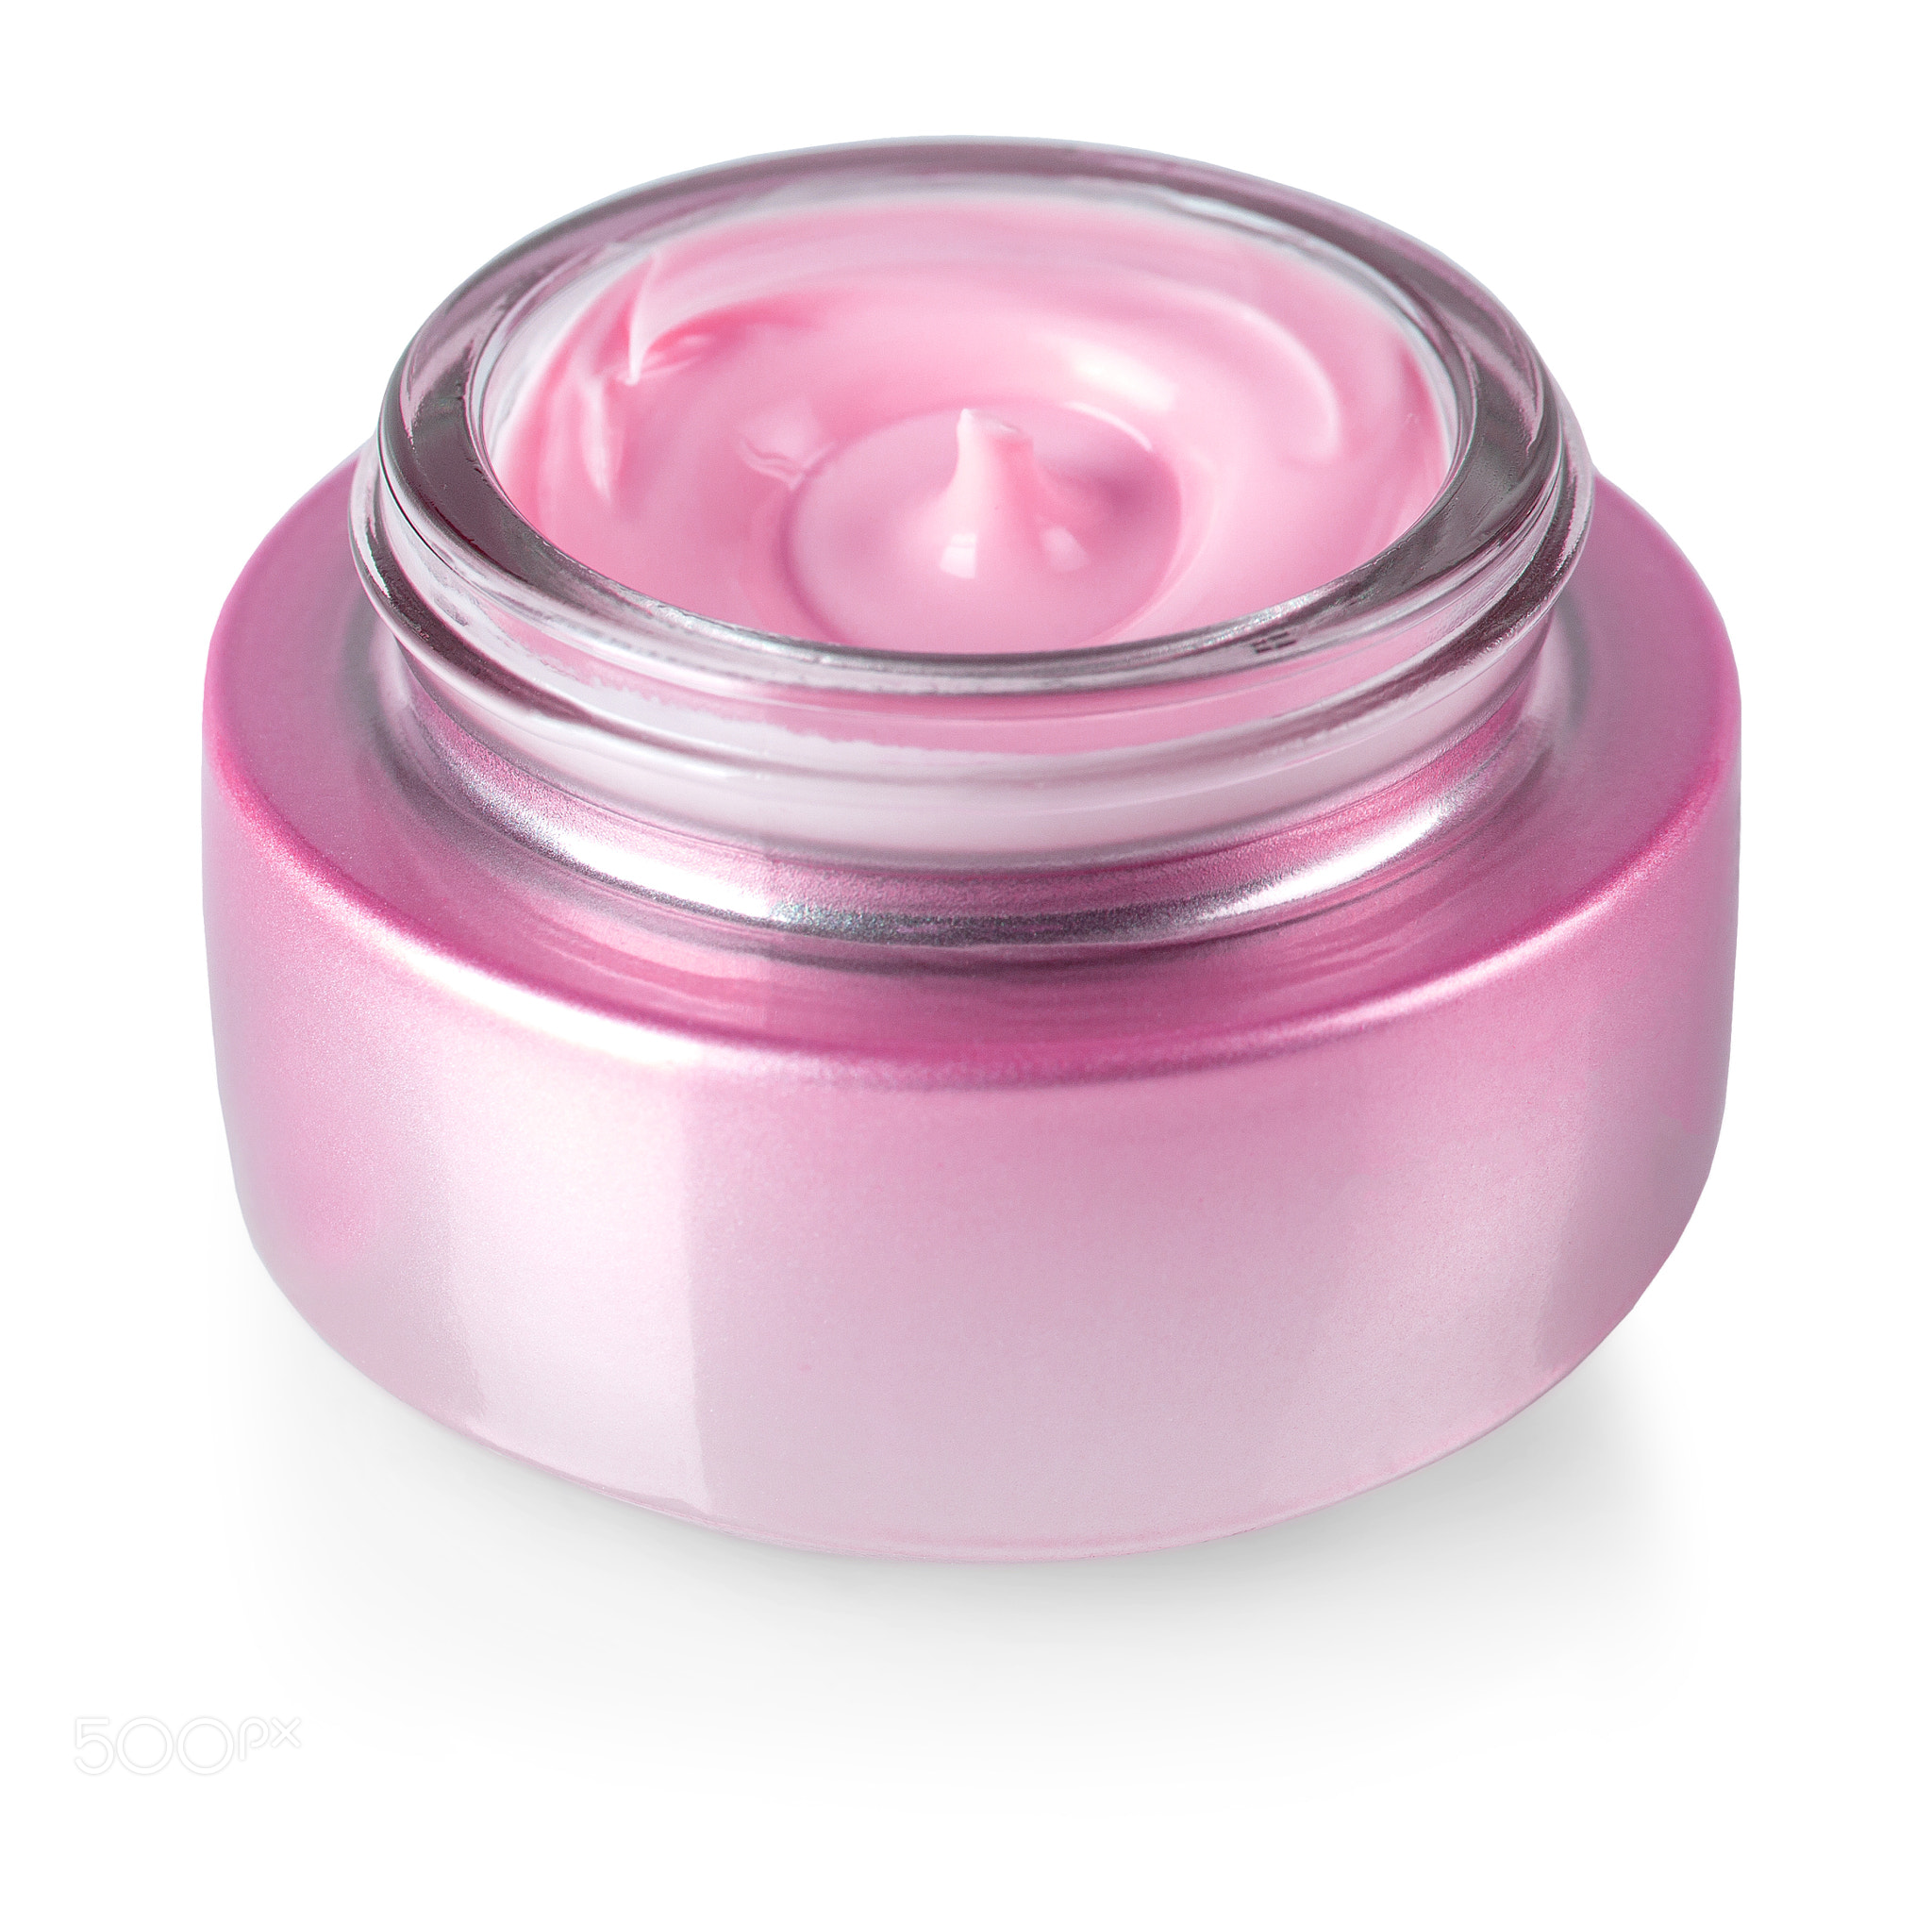 beauty cream or yogurt on white background with clipping path